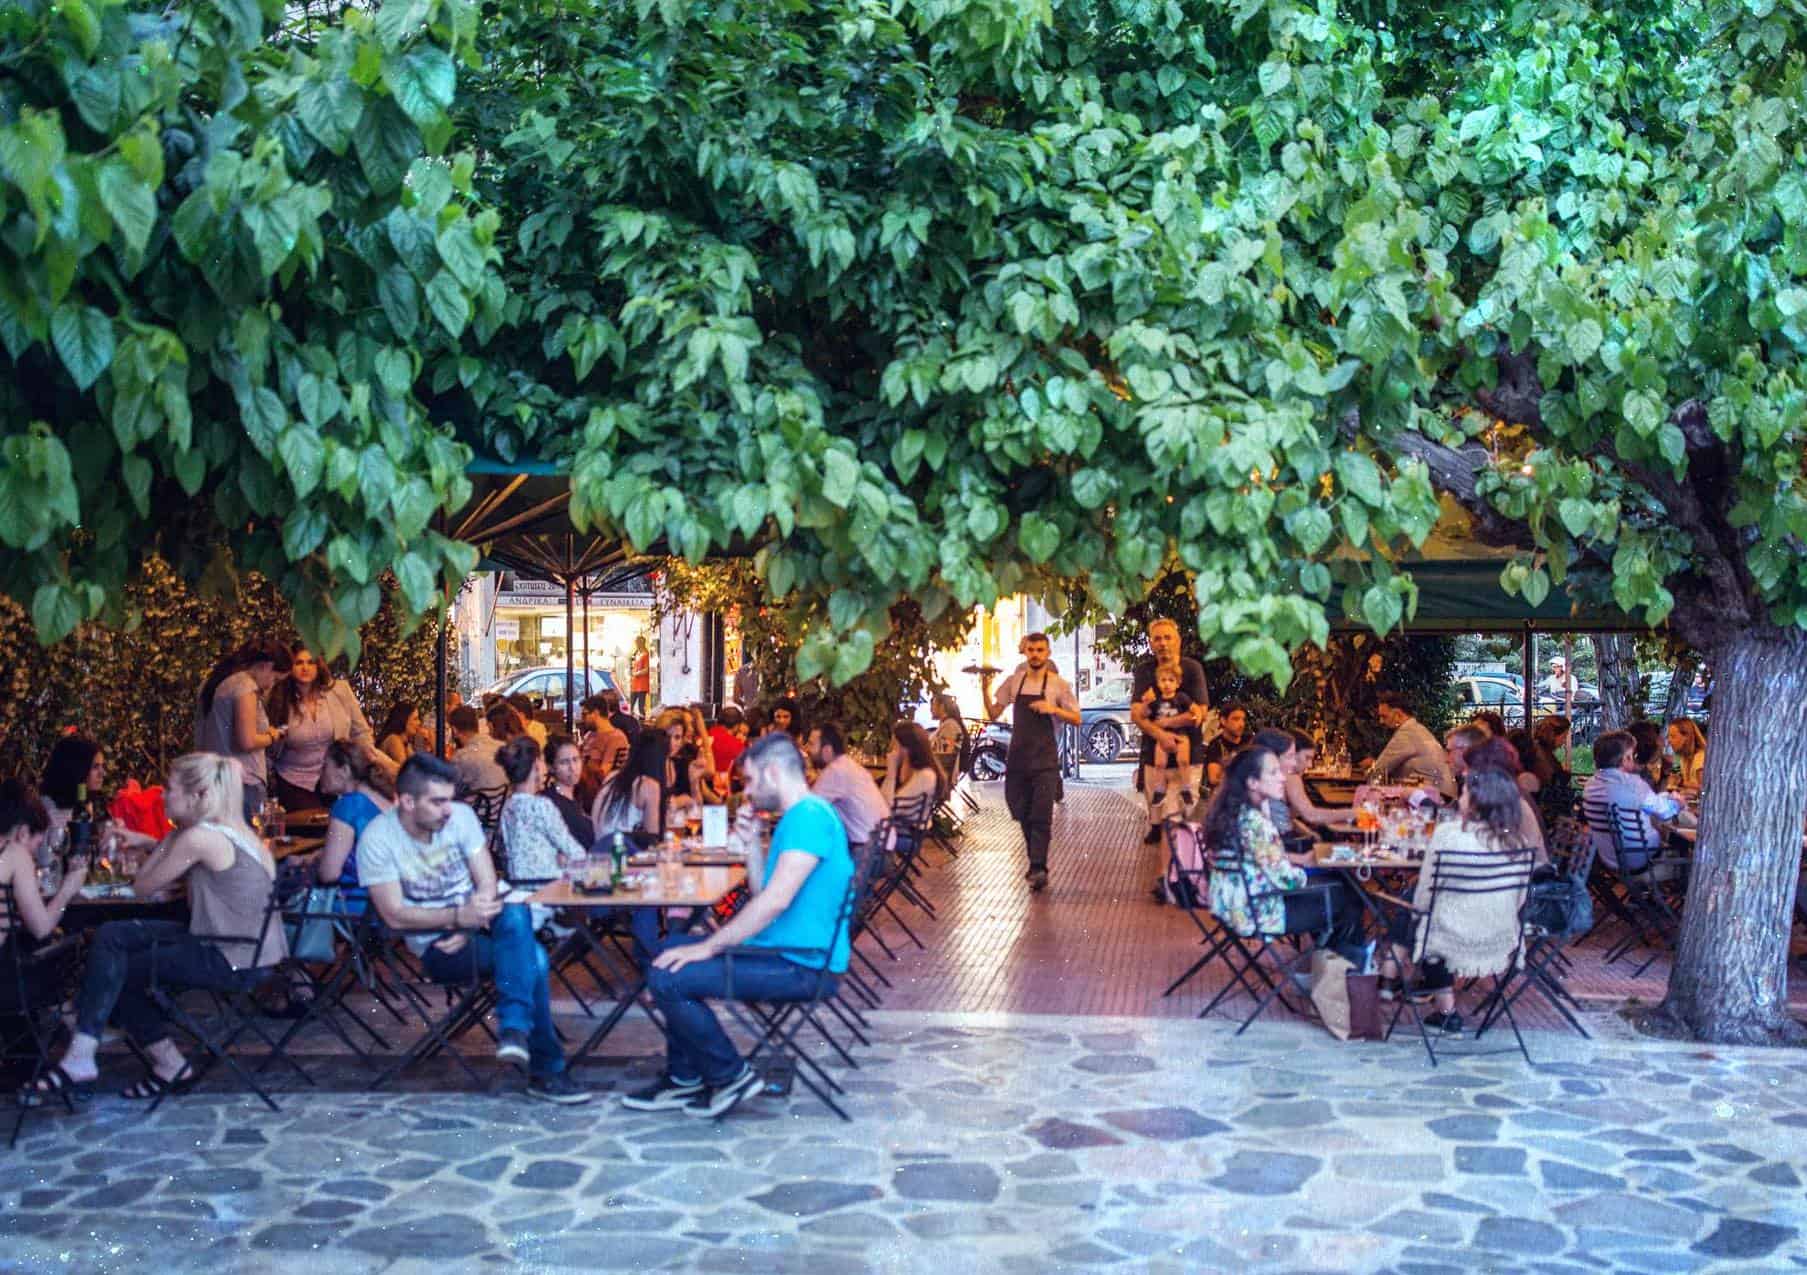 Mavili Square, one of Athens' coolest spots to grab a drink